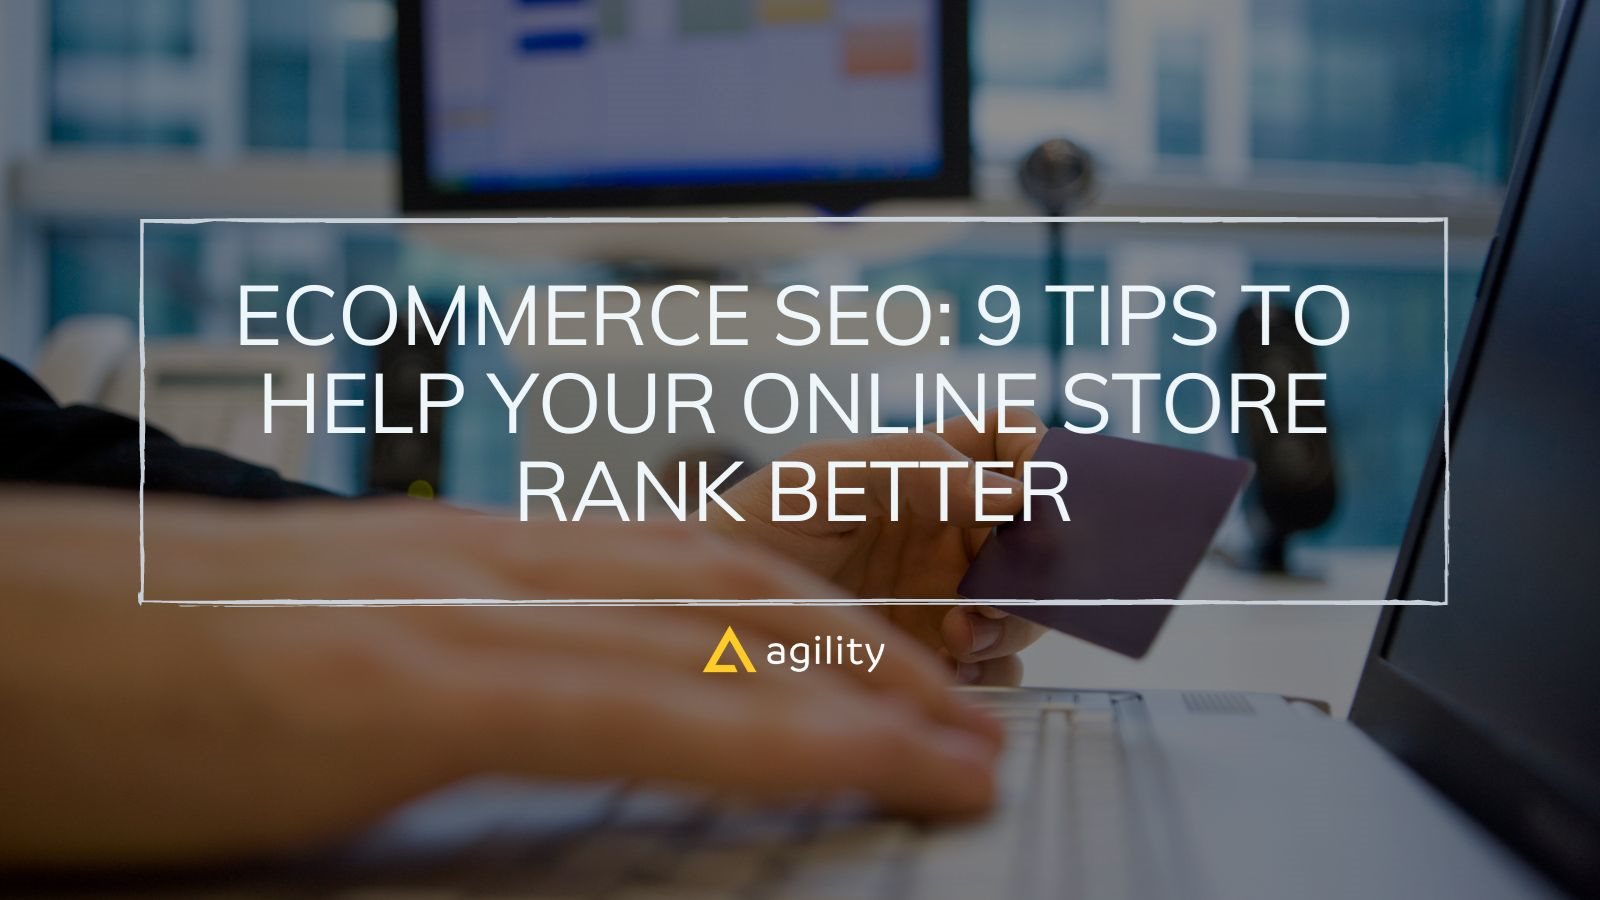 Ecommerce SEO: 9 Tips to Help Your Online Store Rank Better